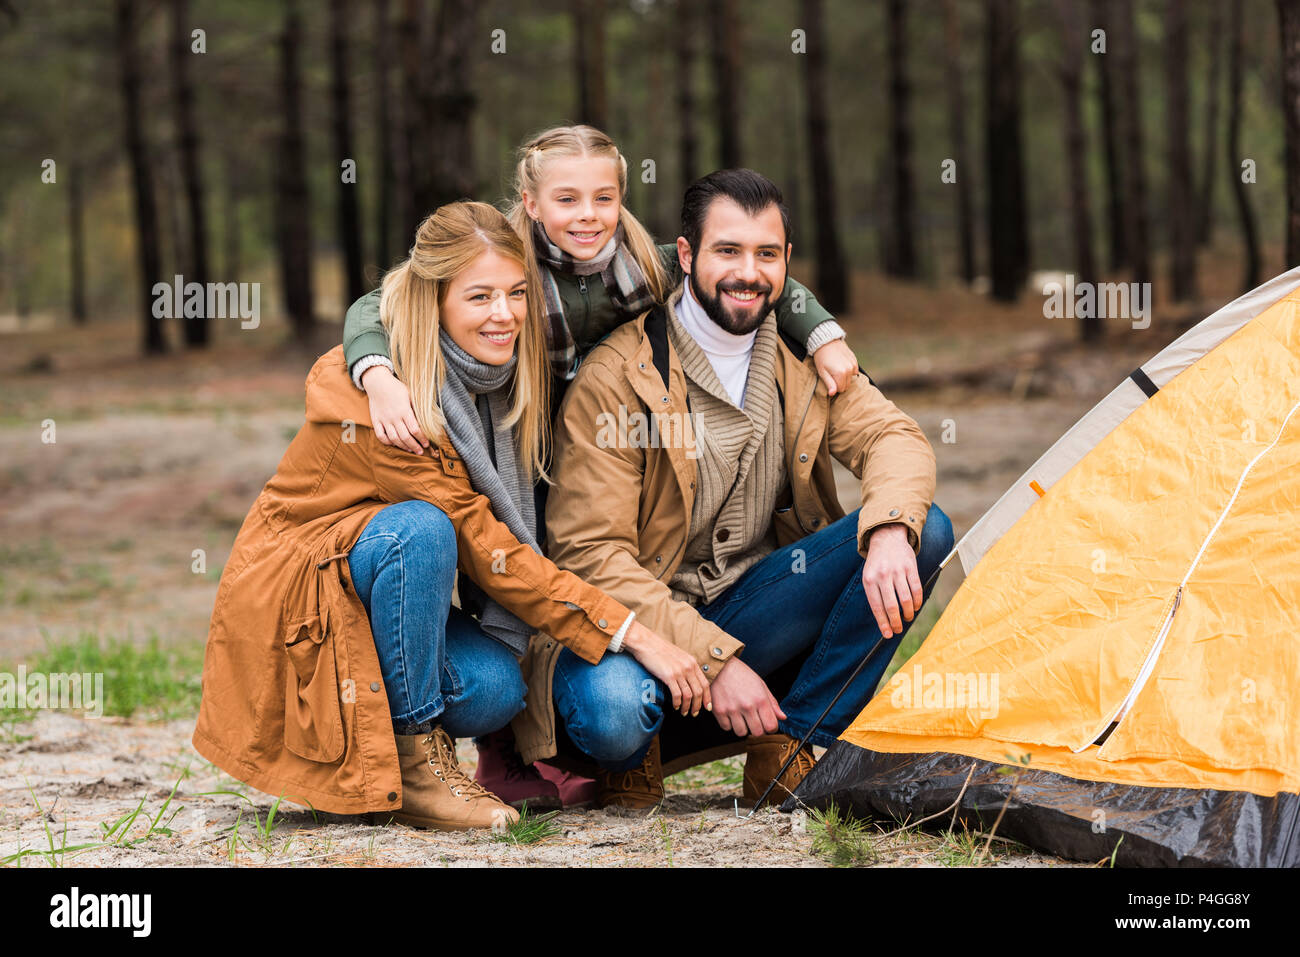 young family installing tent together in pine forest Stock Photo